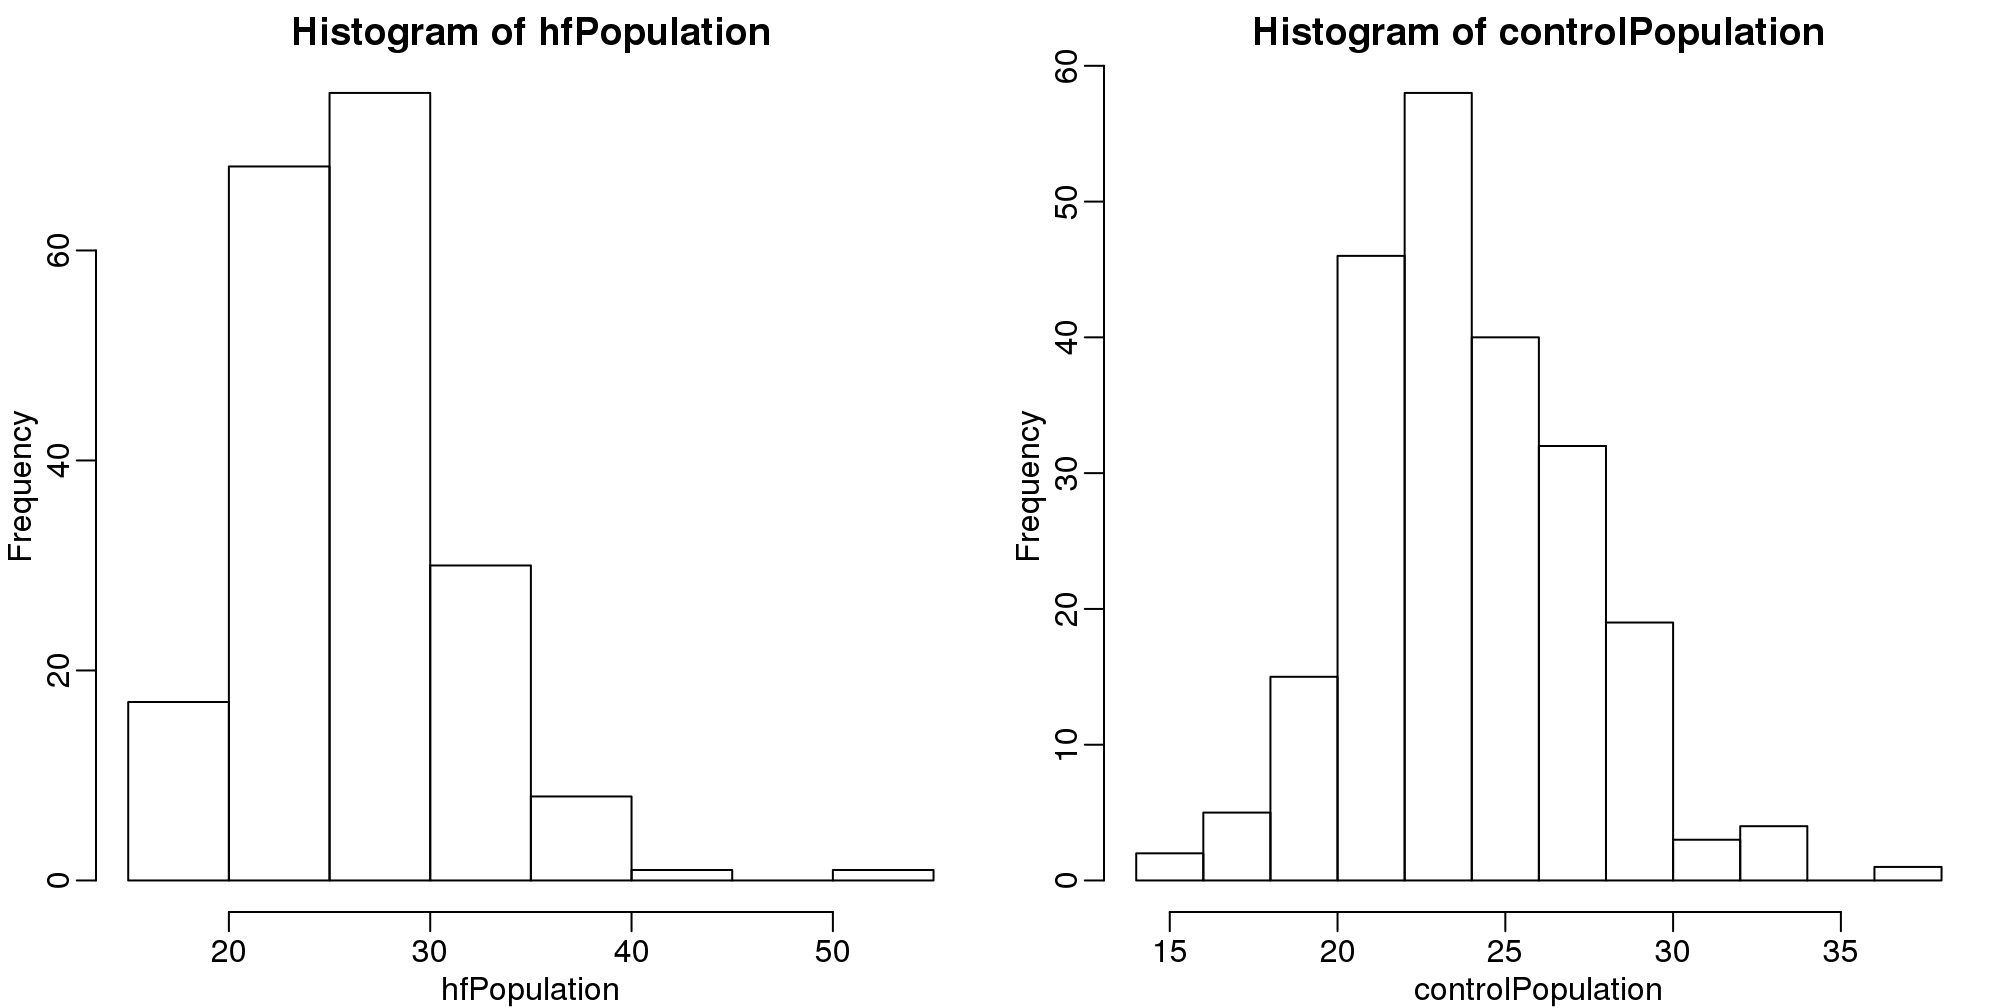 Histograms of all weights for both populations.